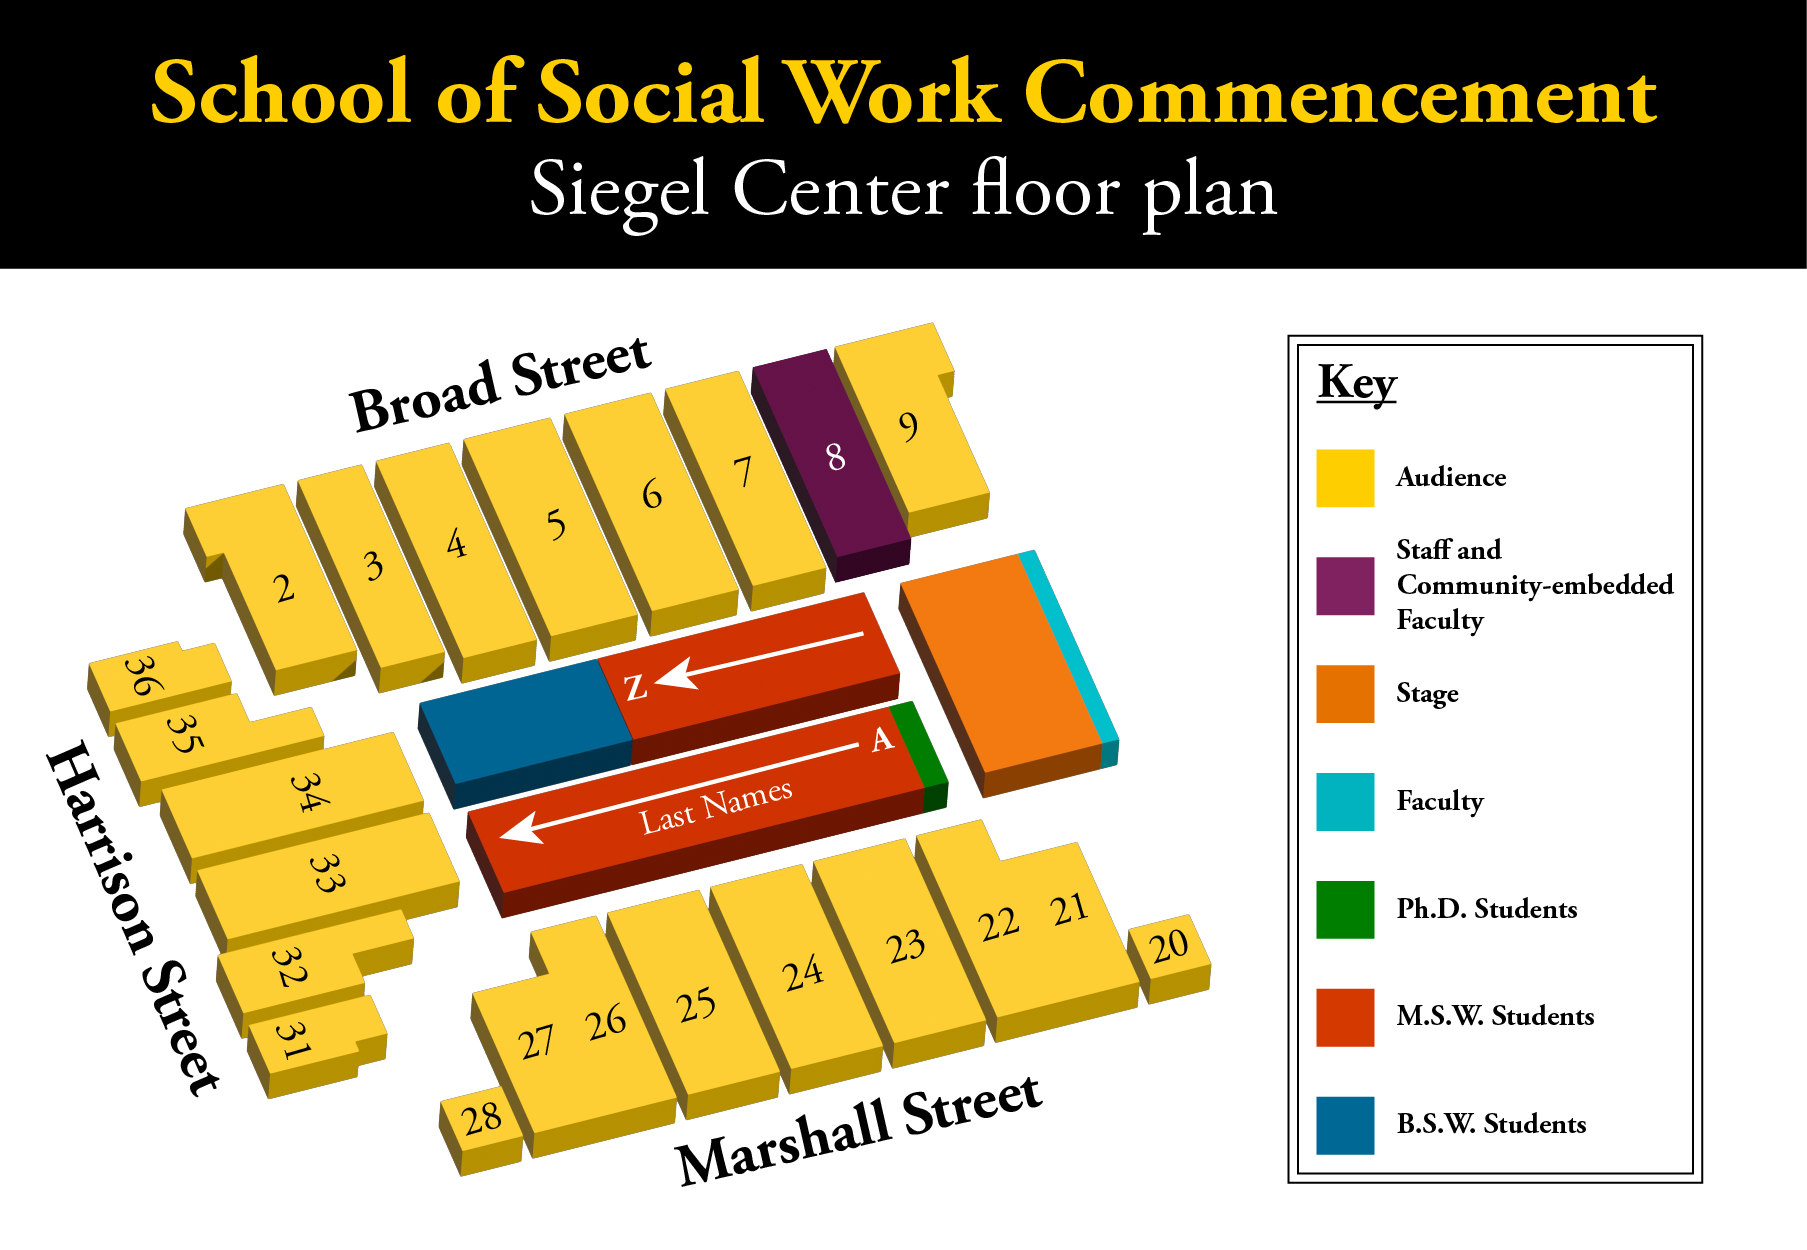 School of Social Work Commencement: Siegel Center floor plan. Sections 2-9 on Broad St. side (Section 8 for staff & community faculty); 31-36 on Harrison St. side; 20-28 on Marshall St. side. On floor, Ph.D. grads sit front right closest to stage, then M.S.W. grads, who continue into the front of the left section. B.S.W. students sit behind M.S.W. grads. Faculty sit on stage on west-facing side.